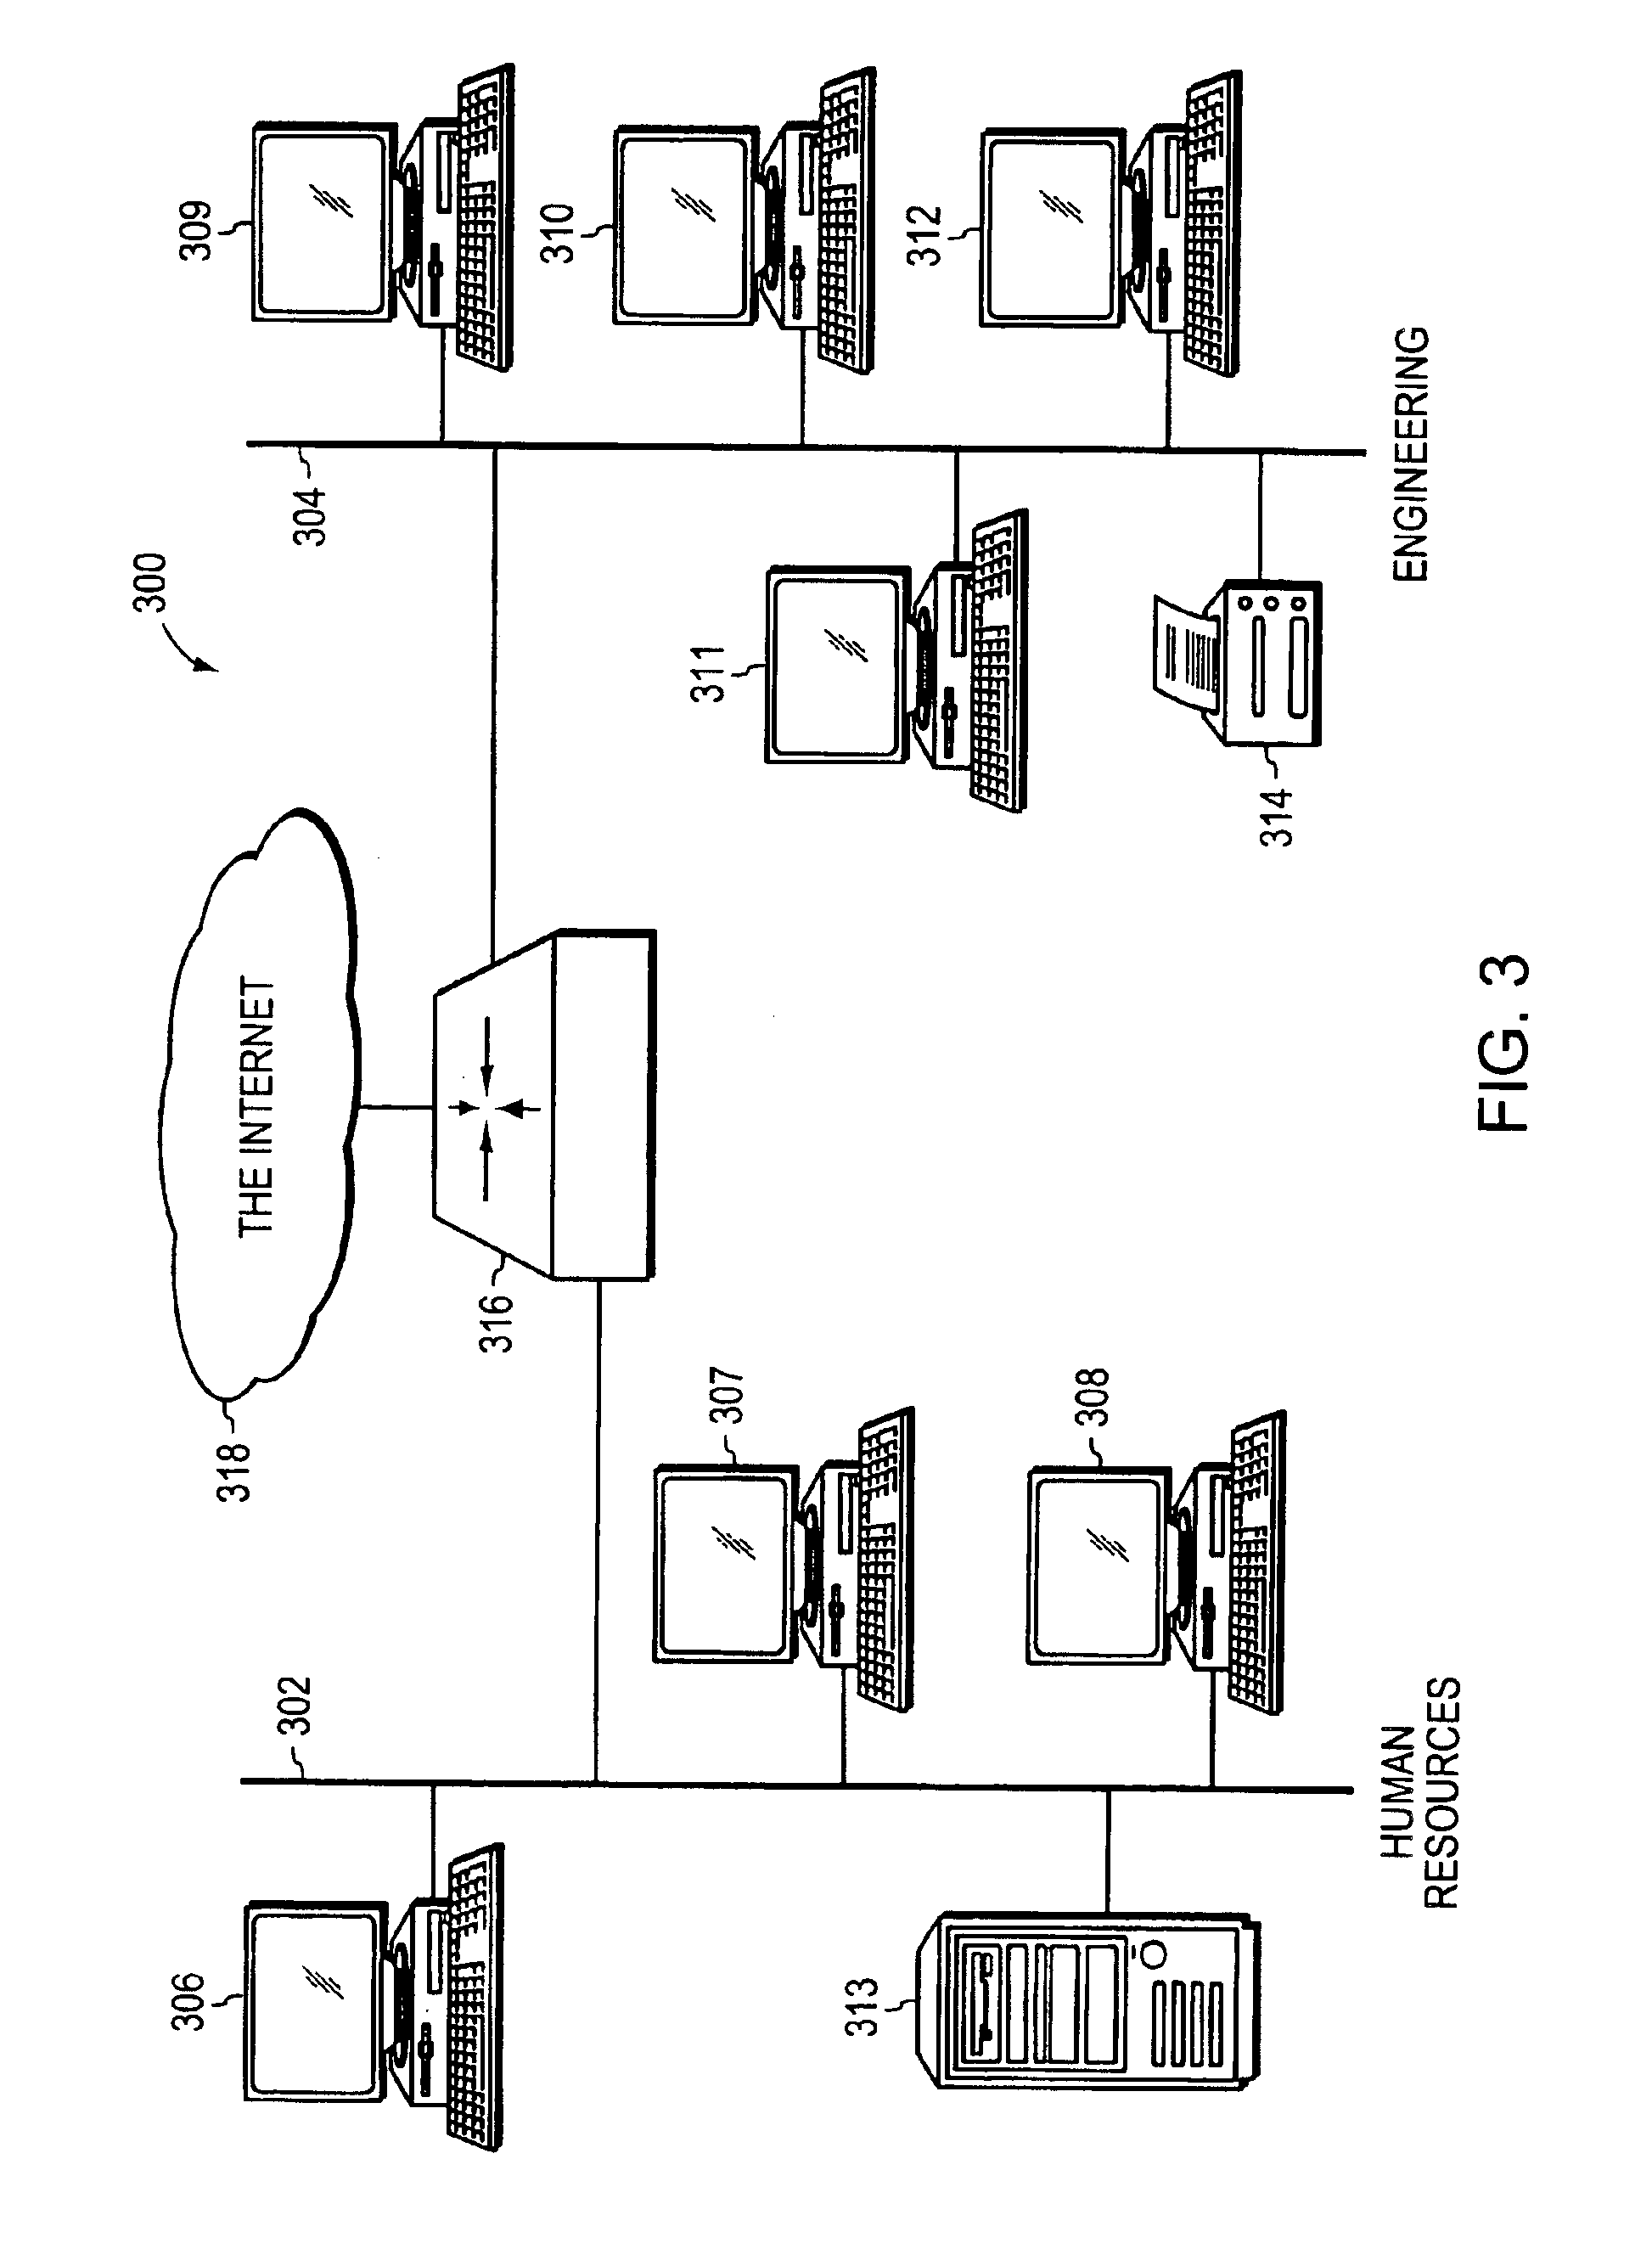 Information searching device